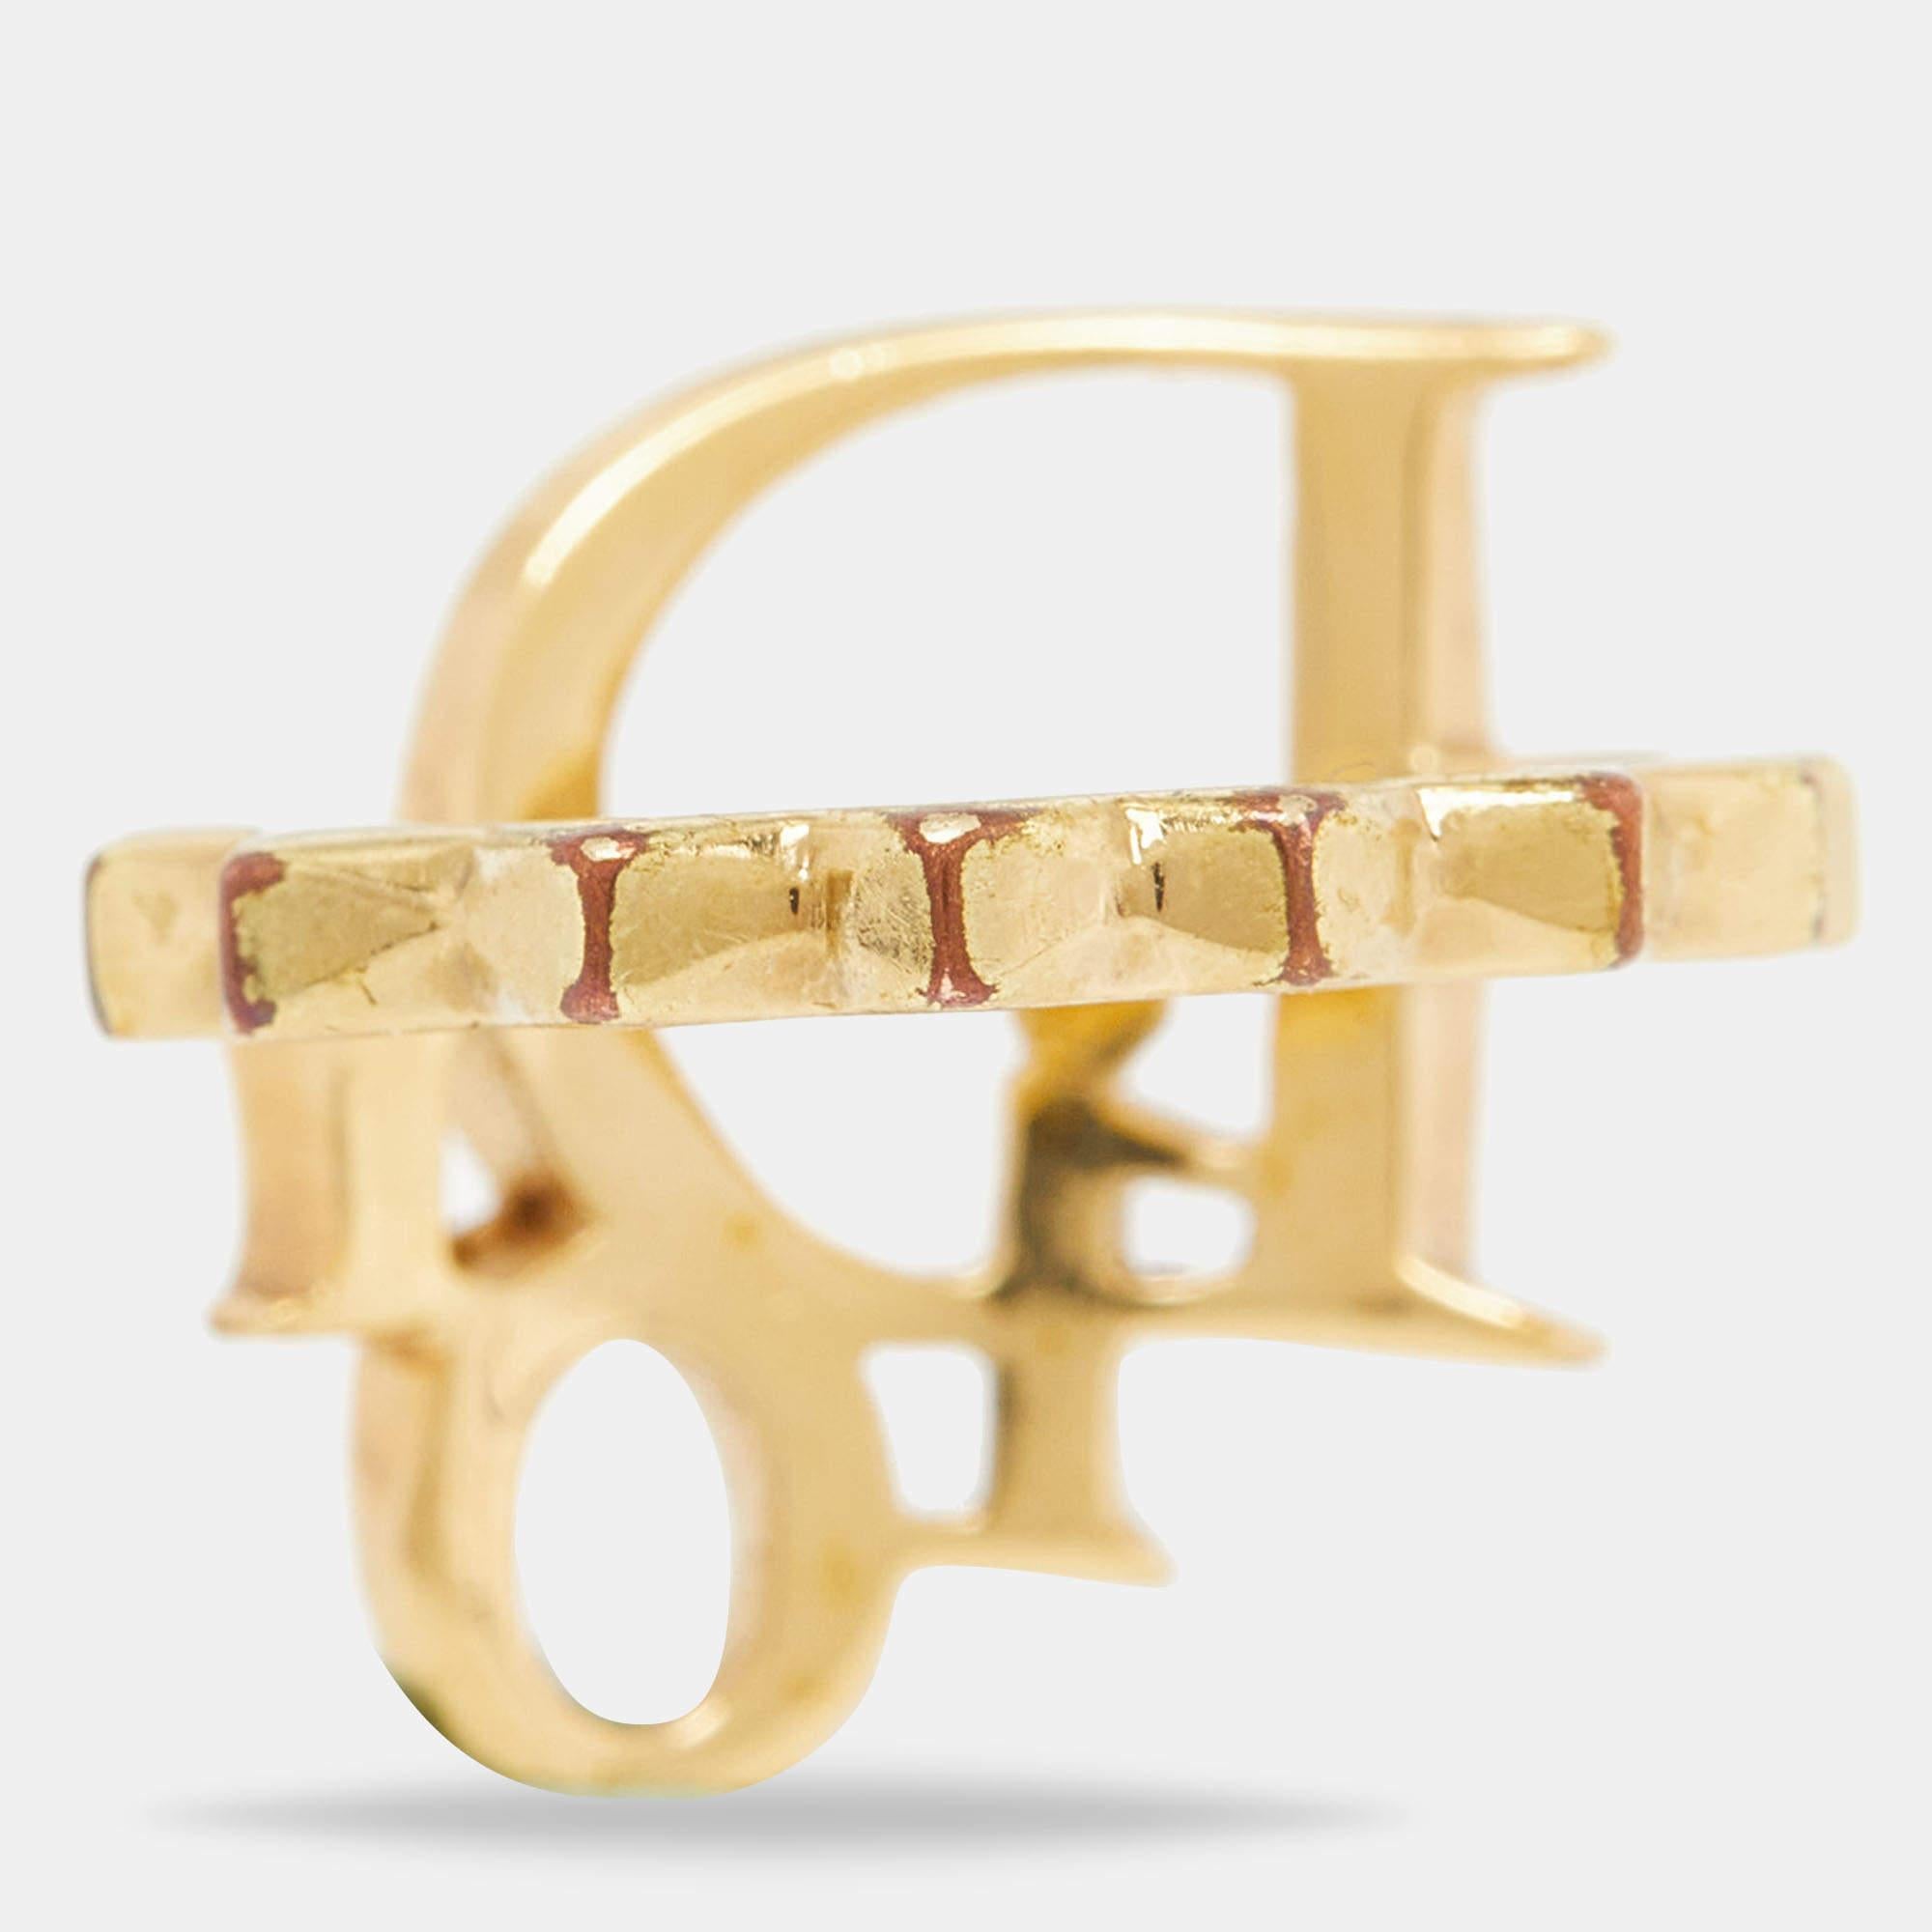 Simple yet sophisticated, this ring comes from the house of Dior. It has been crafted from gold-tone metal and designed with studs and the signature DIOR letters, all beautifully adorned with crystals. The piece is complete with the brand name on